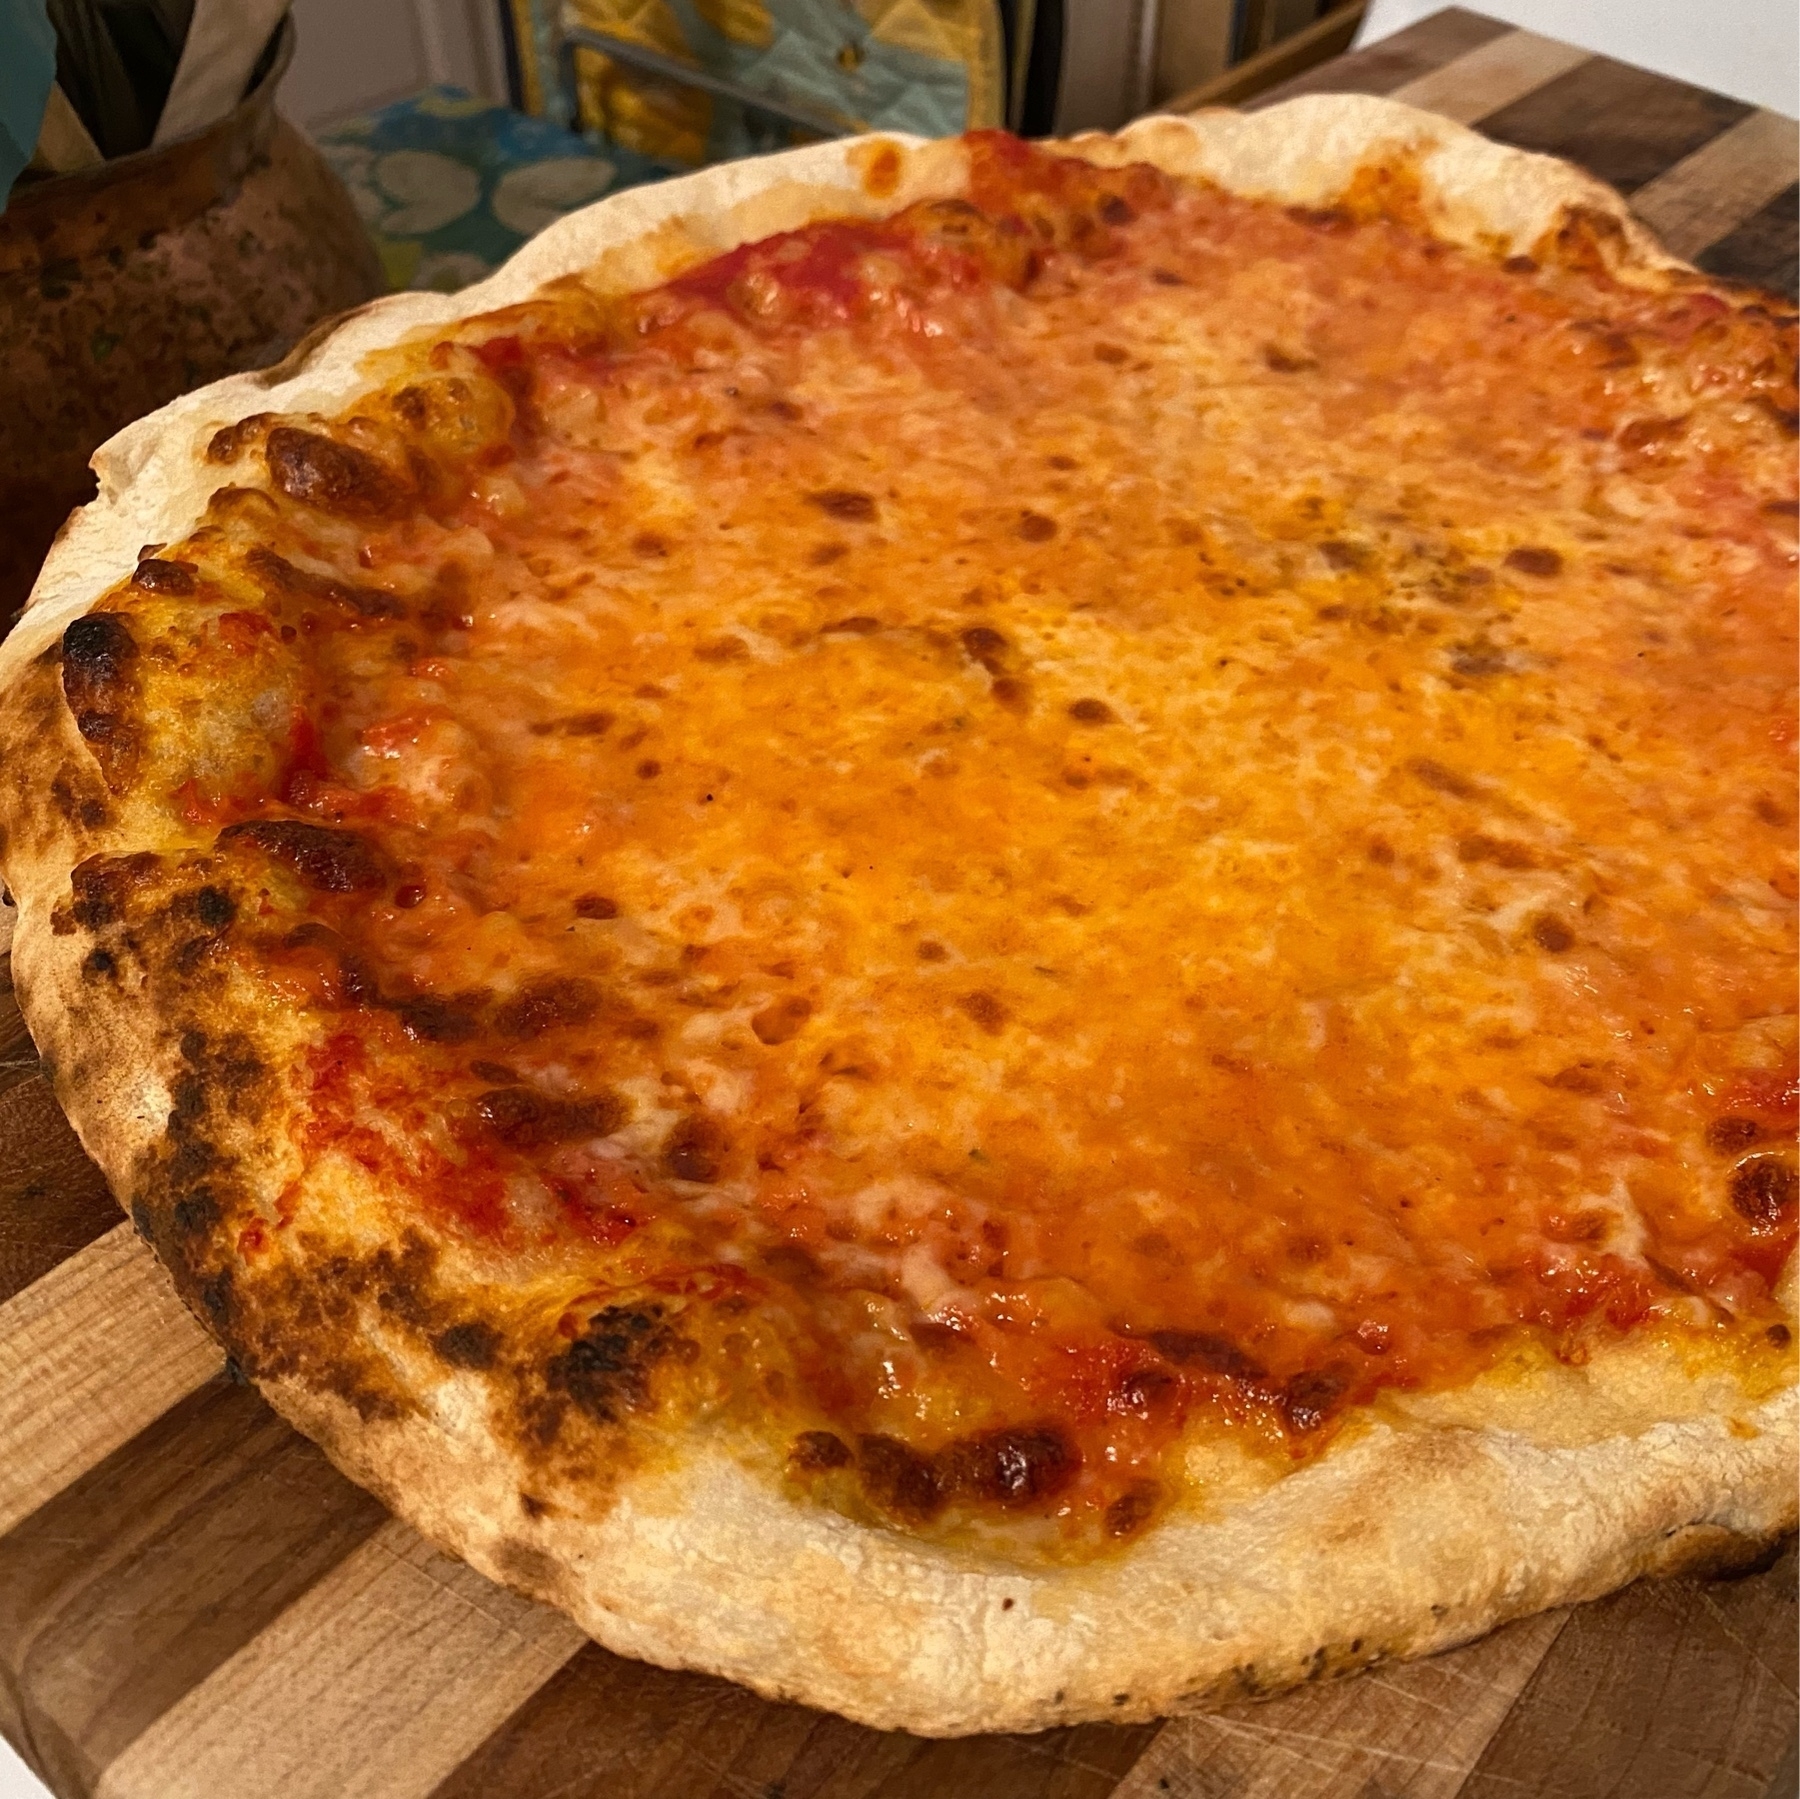 Picture of a fully baked cheese pizza